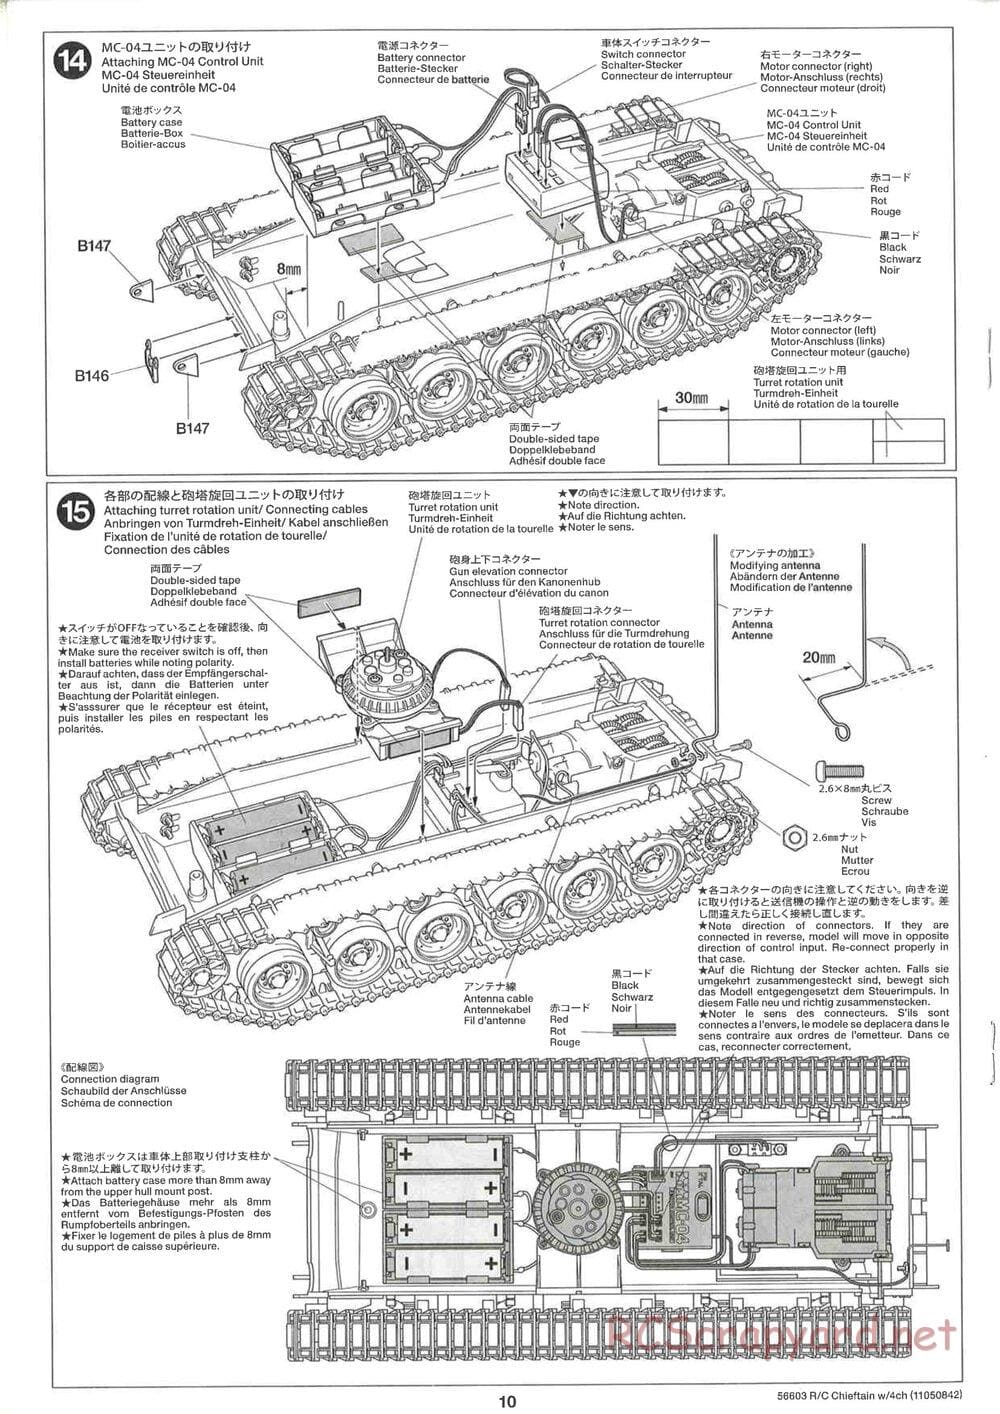 Tamiya - British Army Battle Tank Cheiftain - 1/25 Scale Chassis - Manual - Page 10